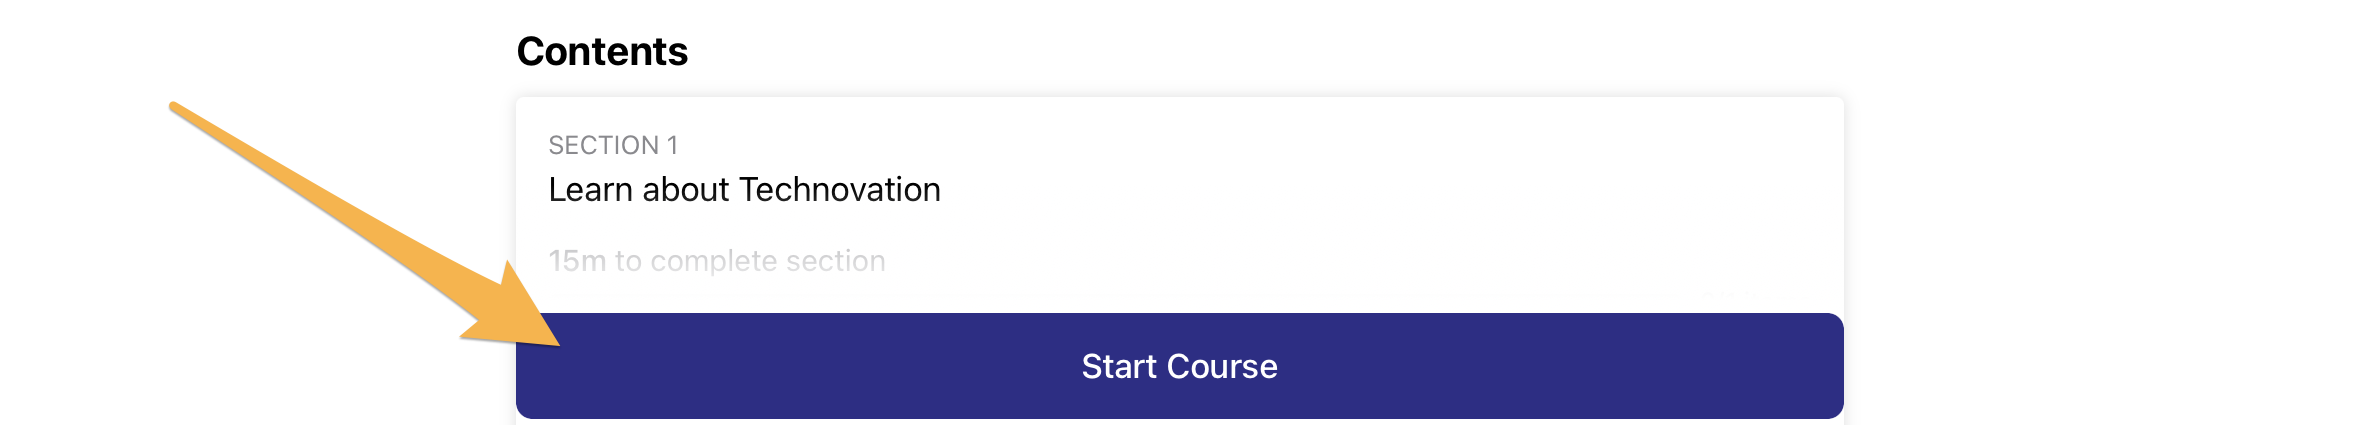 courses-ios-5.png